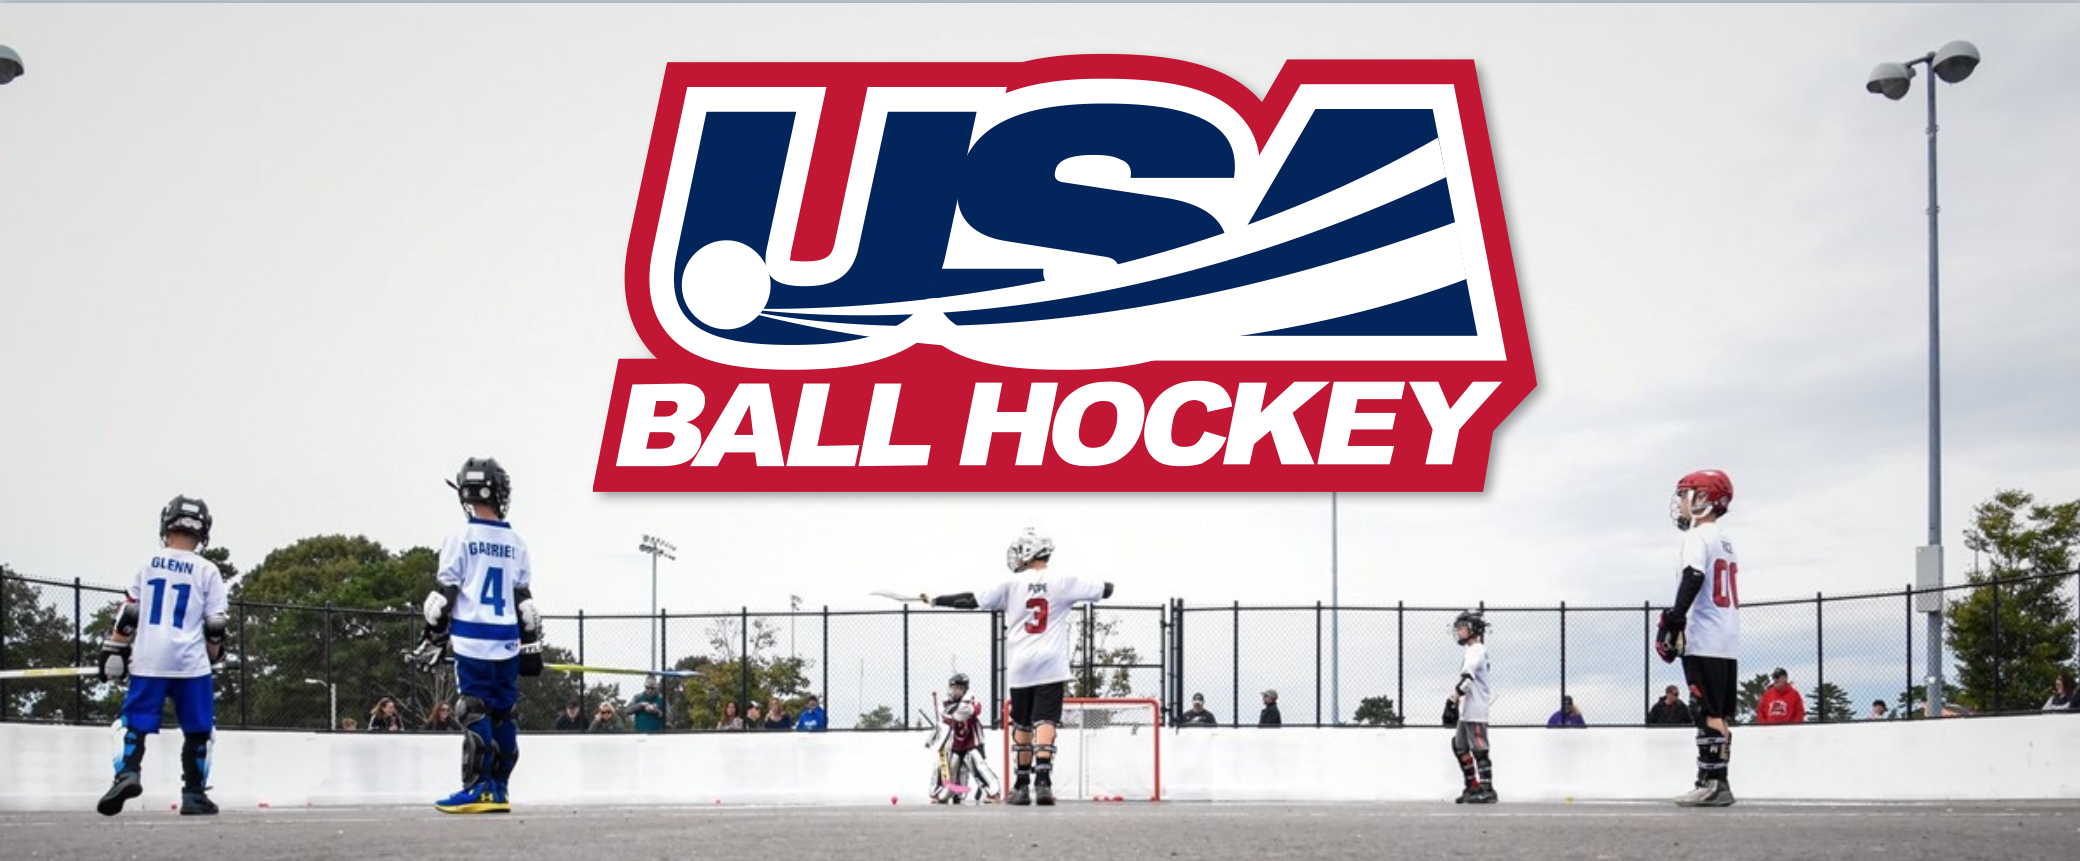 USA Ball Hockey aspires to evolve and support communities by organizing programs that develop players, coaches, officials, and facilities with the goal of competing at the highest level in world competition.